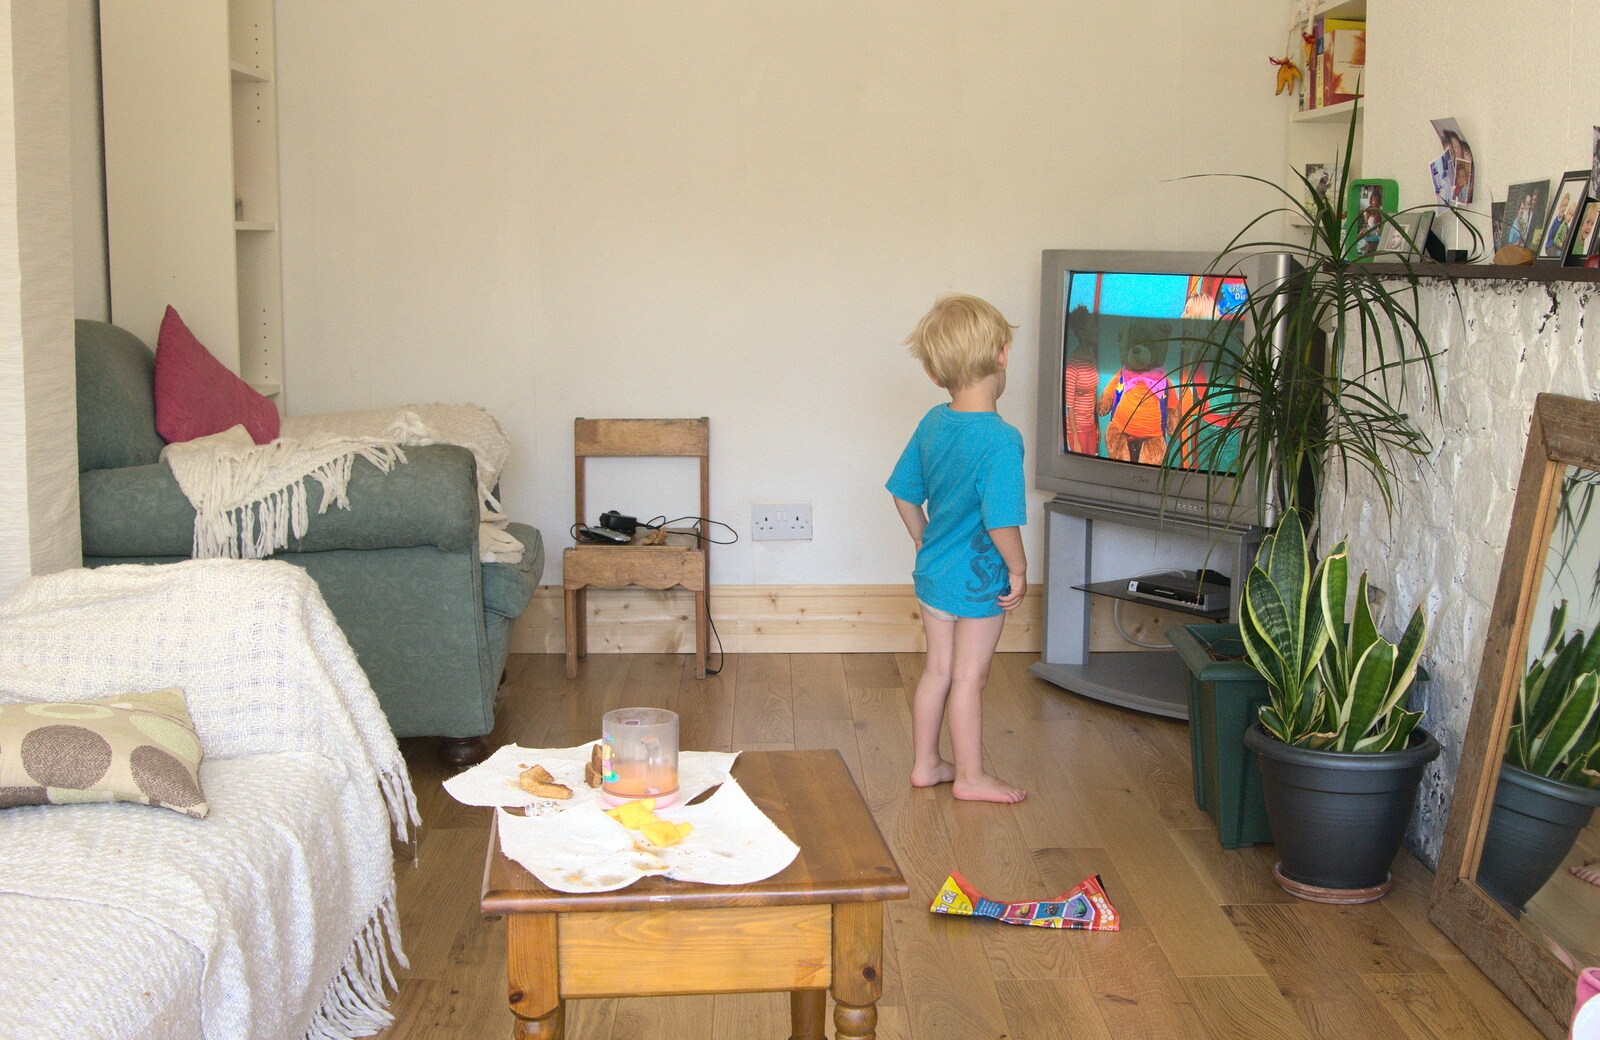 Harry likes to watch telly from 20cm away from Camping at Silver Strand, Wicklow, County Wicklow, Ireland - 7th August 2014